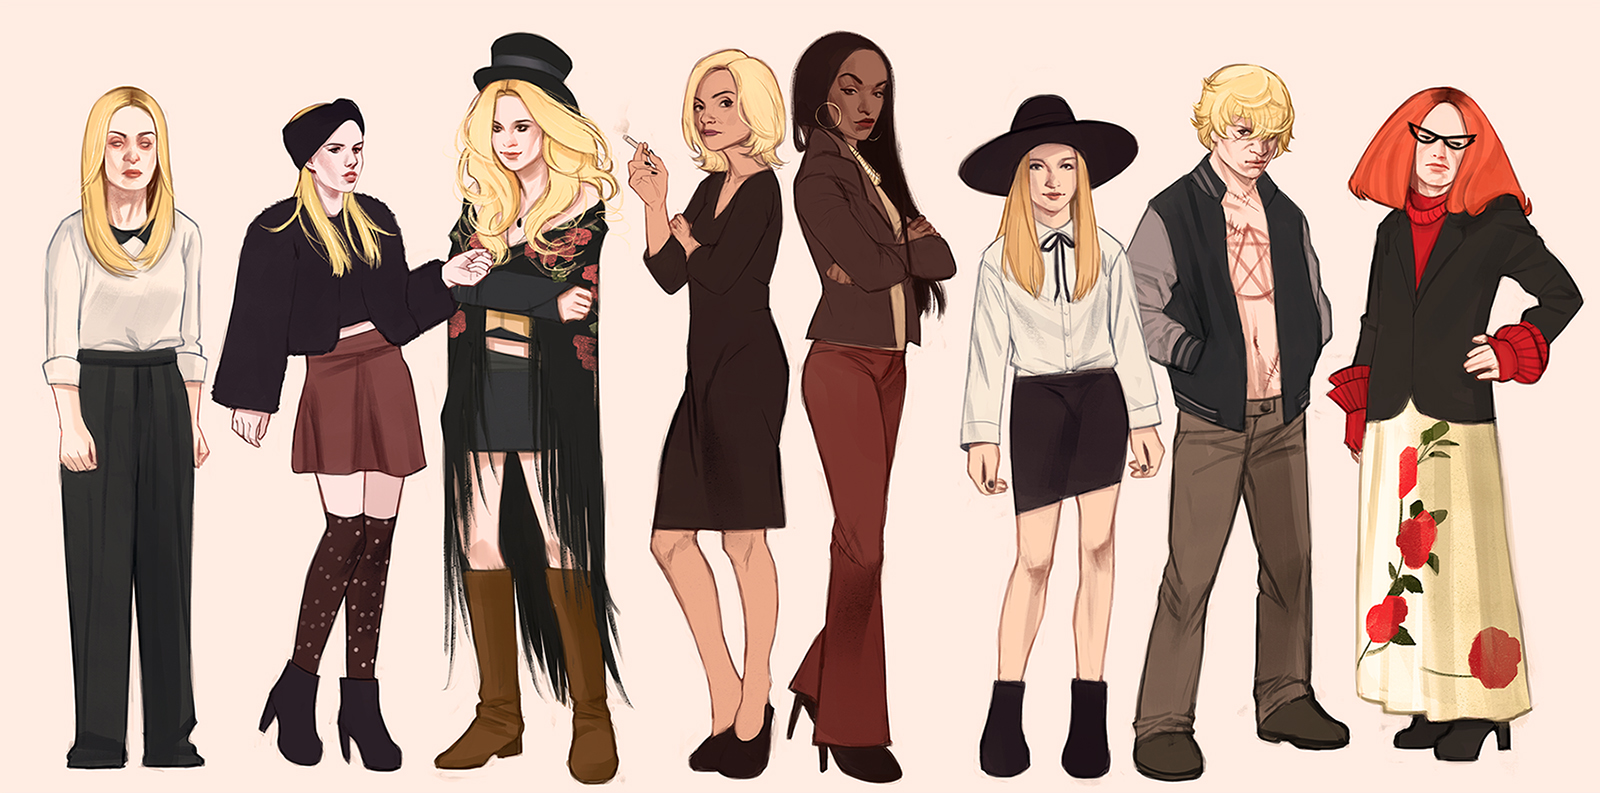 American Horror Story Coven characters by mannequin atelier on 1600x793